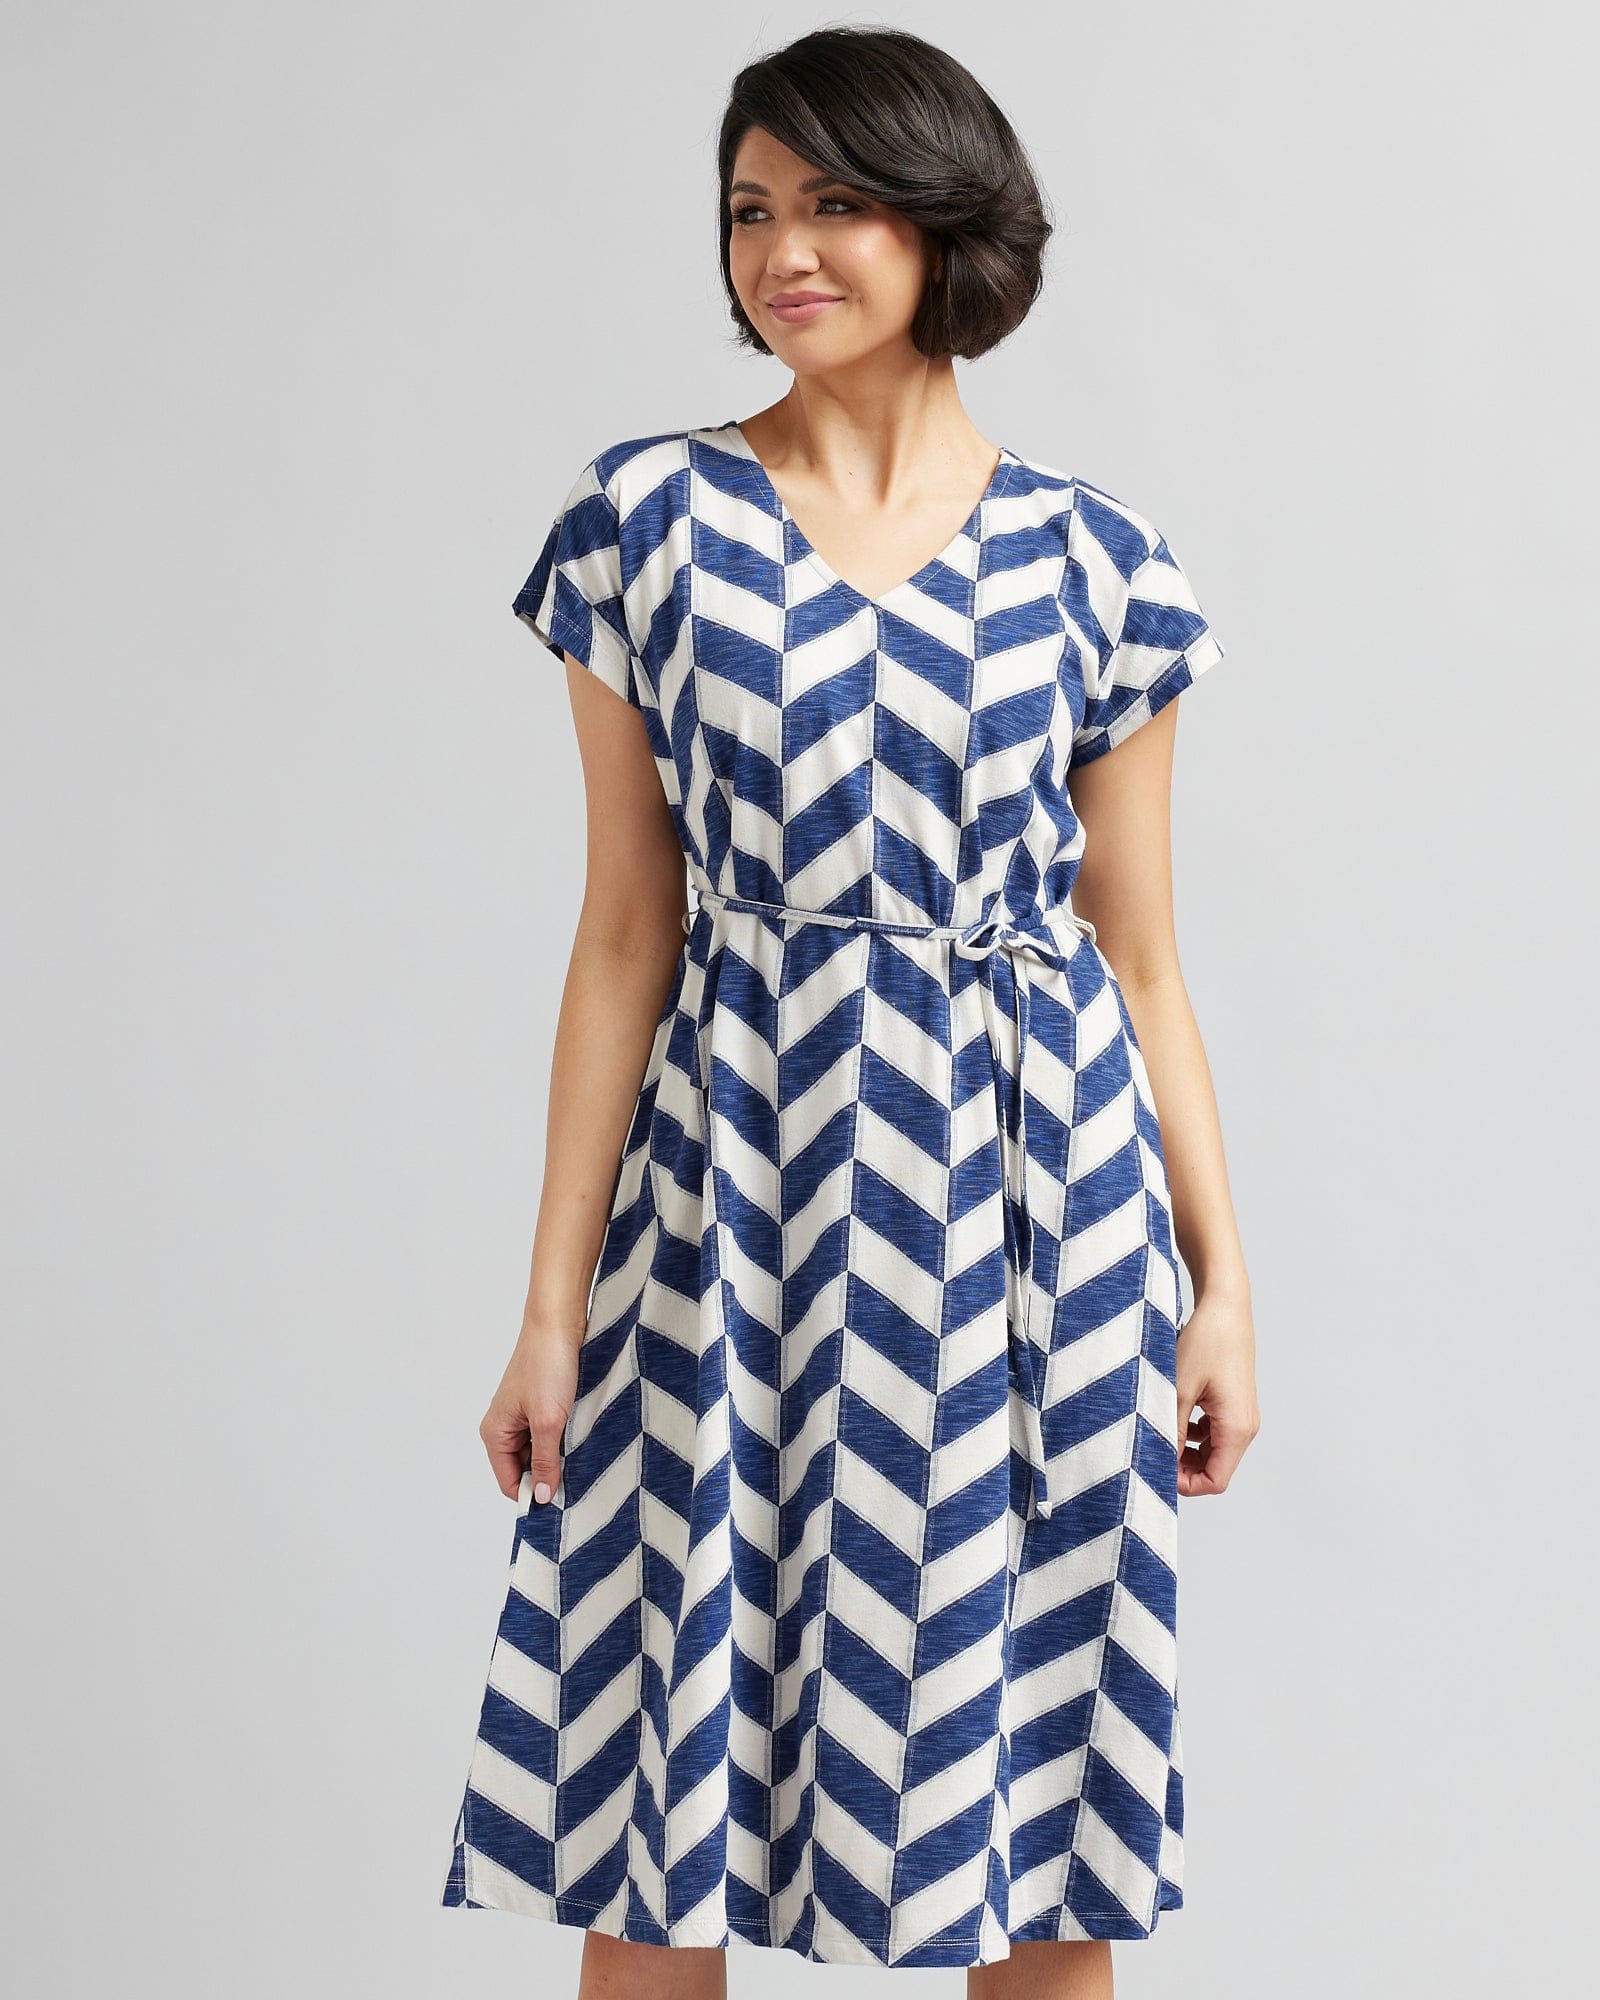 Woman in a short sleeve, midi-length, blue and white chevron patterned dress